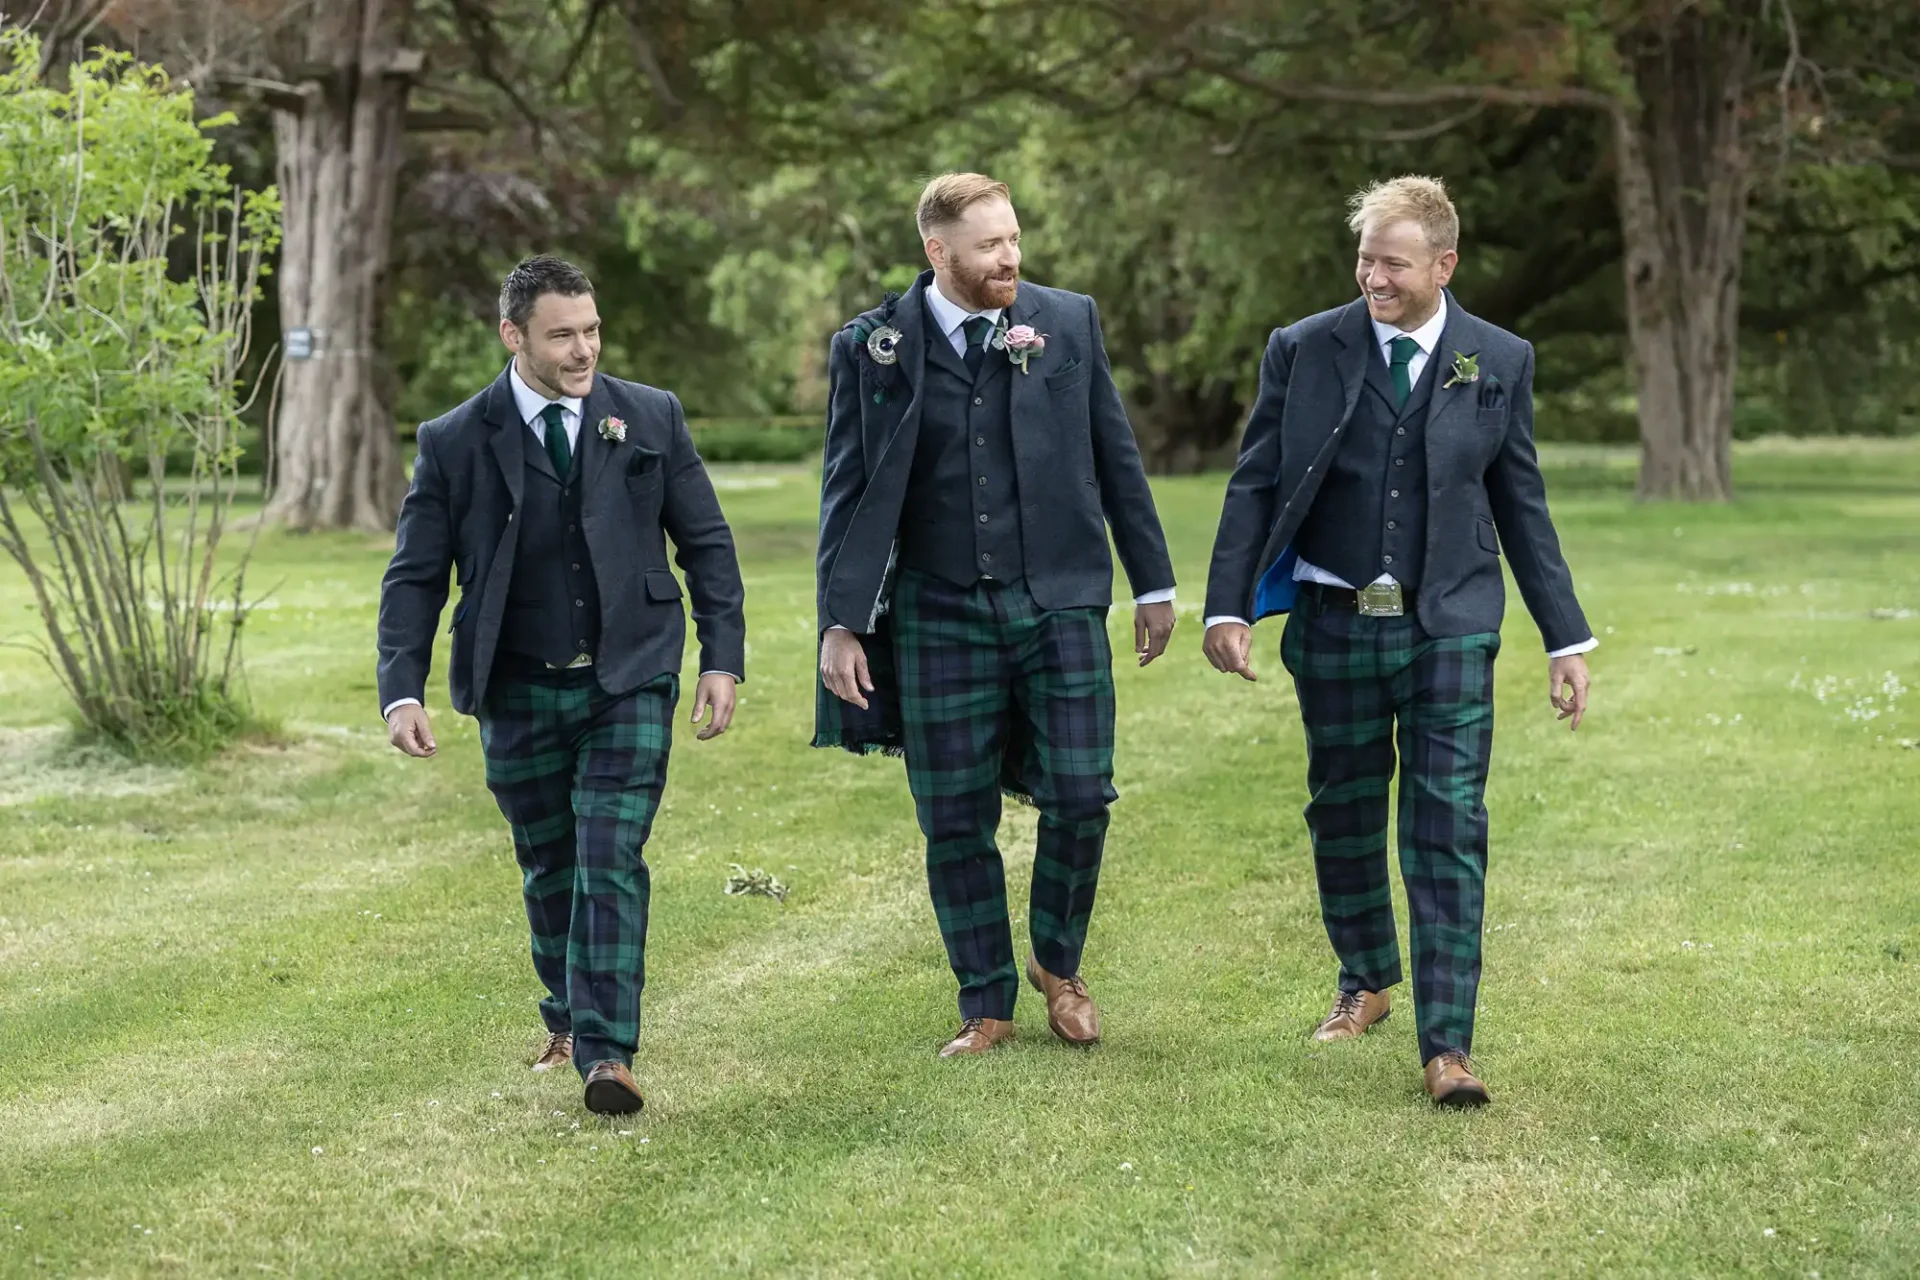 Three men in matching tartan kilts and jackets walk across a grassy area, laughing and enjoying each other's company.